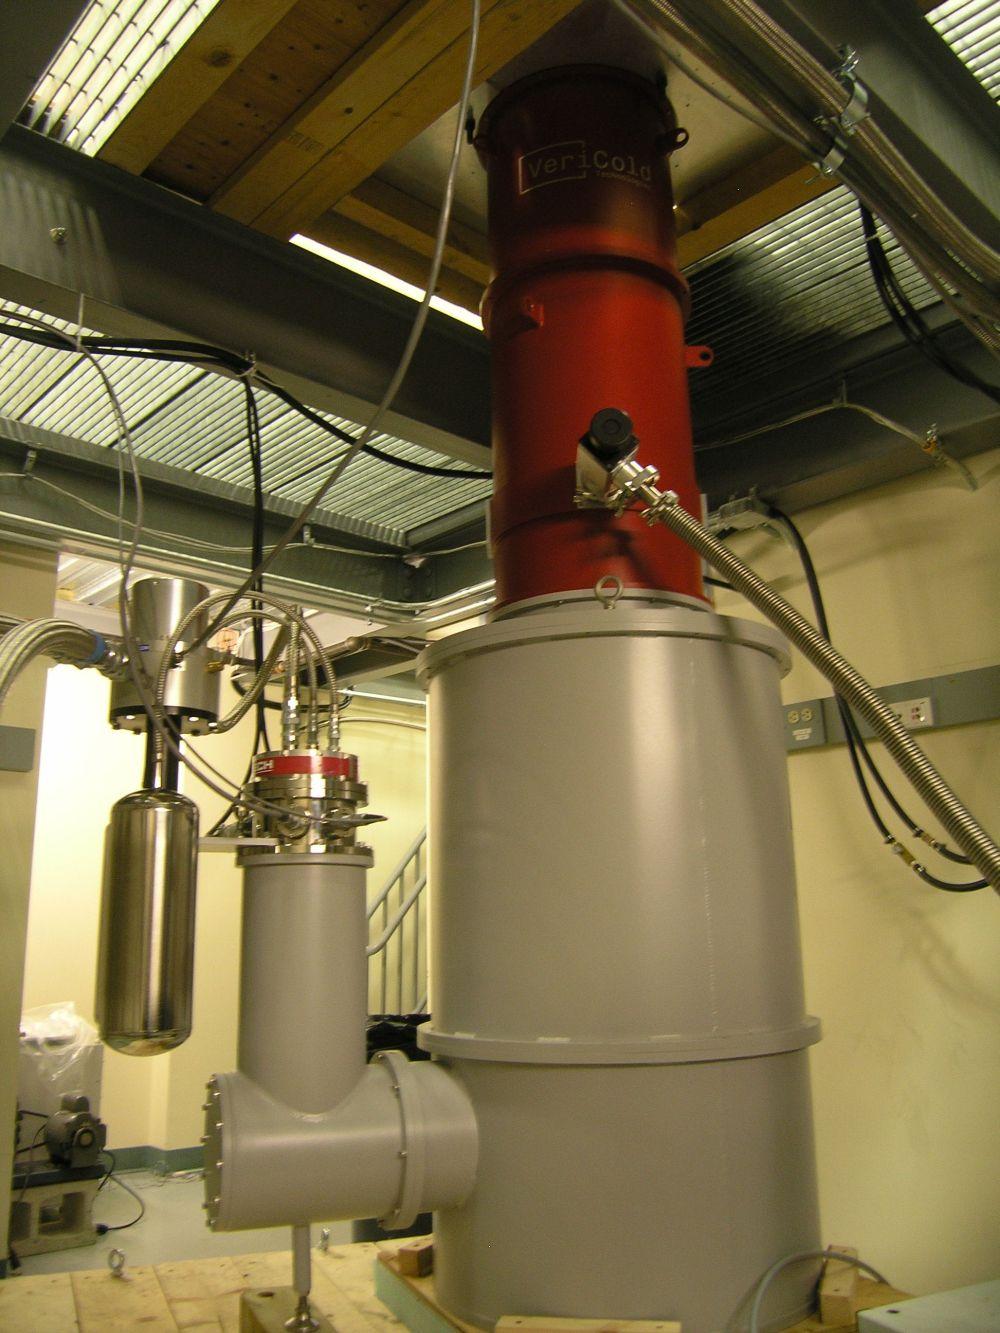 The fully assembled HAYSTAC detector is housed inside a cylindrical vacuum chamber about 10 feet tall on the lower-level of a two-story lab.